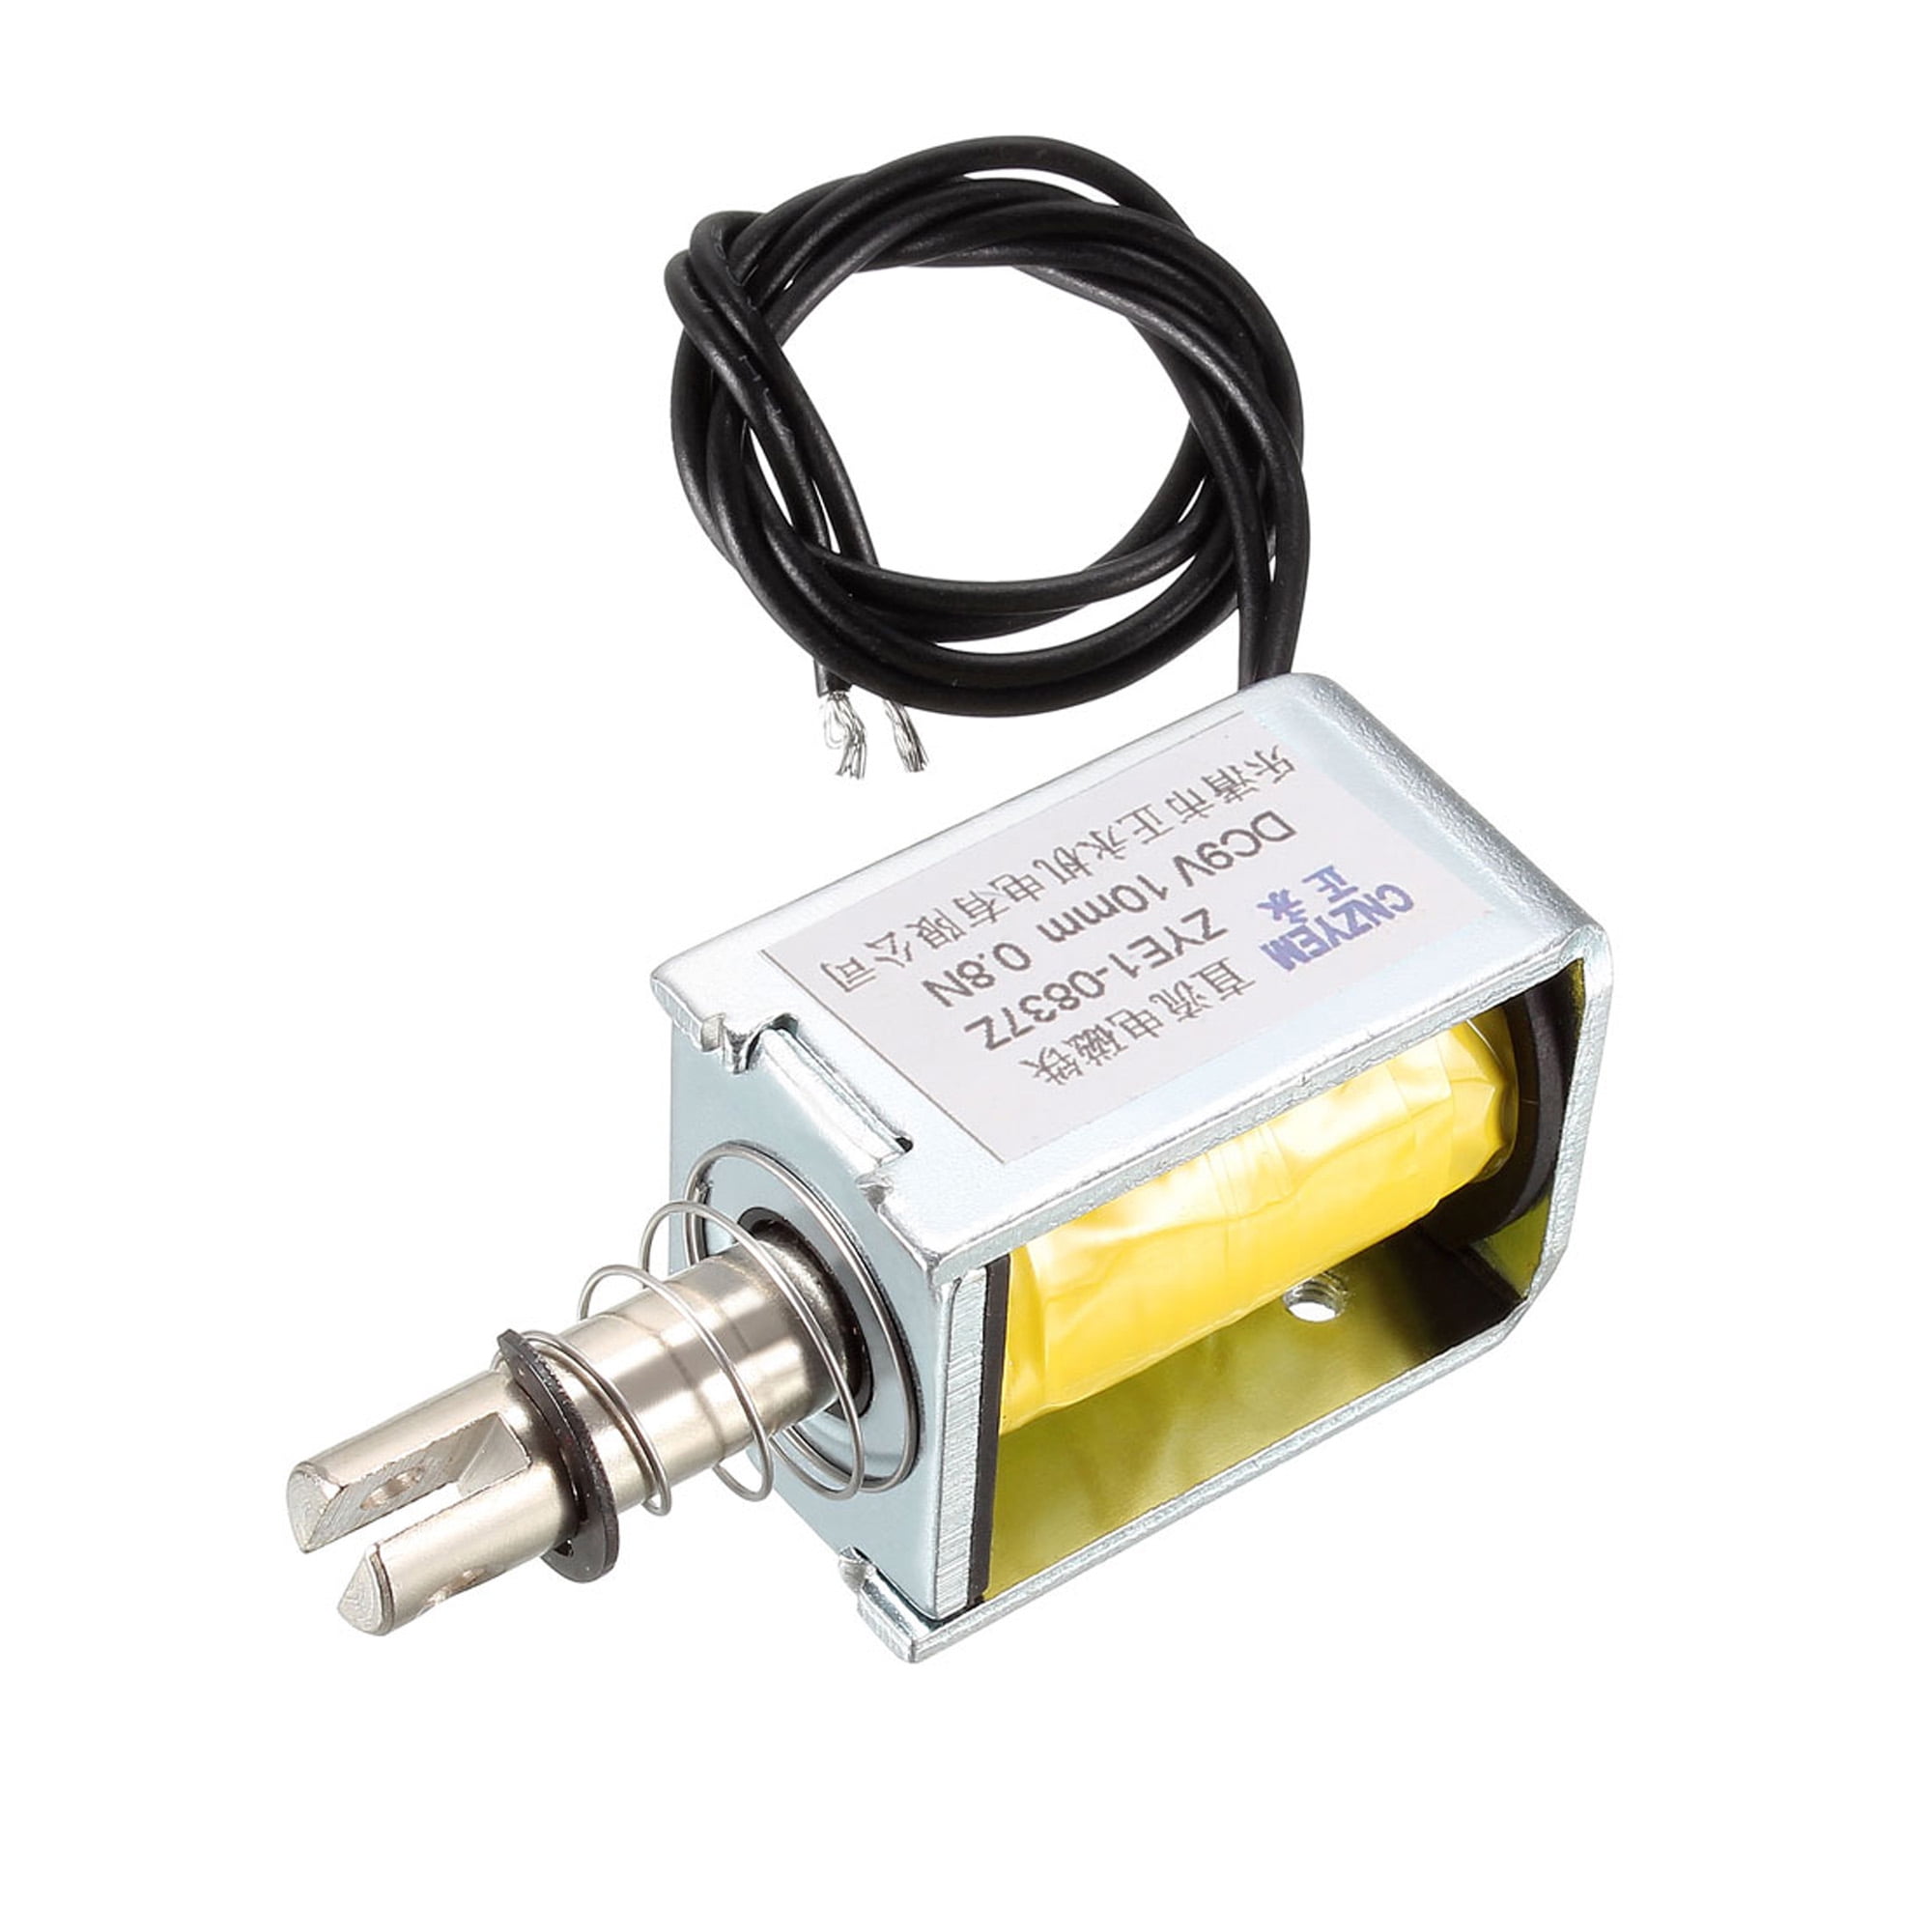 6-12 V Operation Solenoid Pull-Type with 10 mm Stroke 